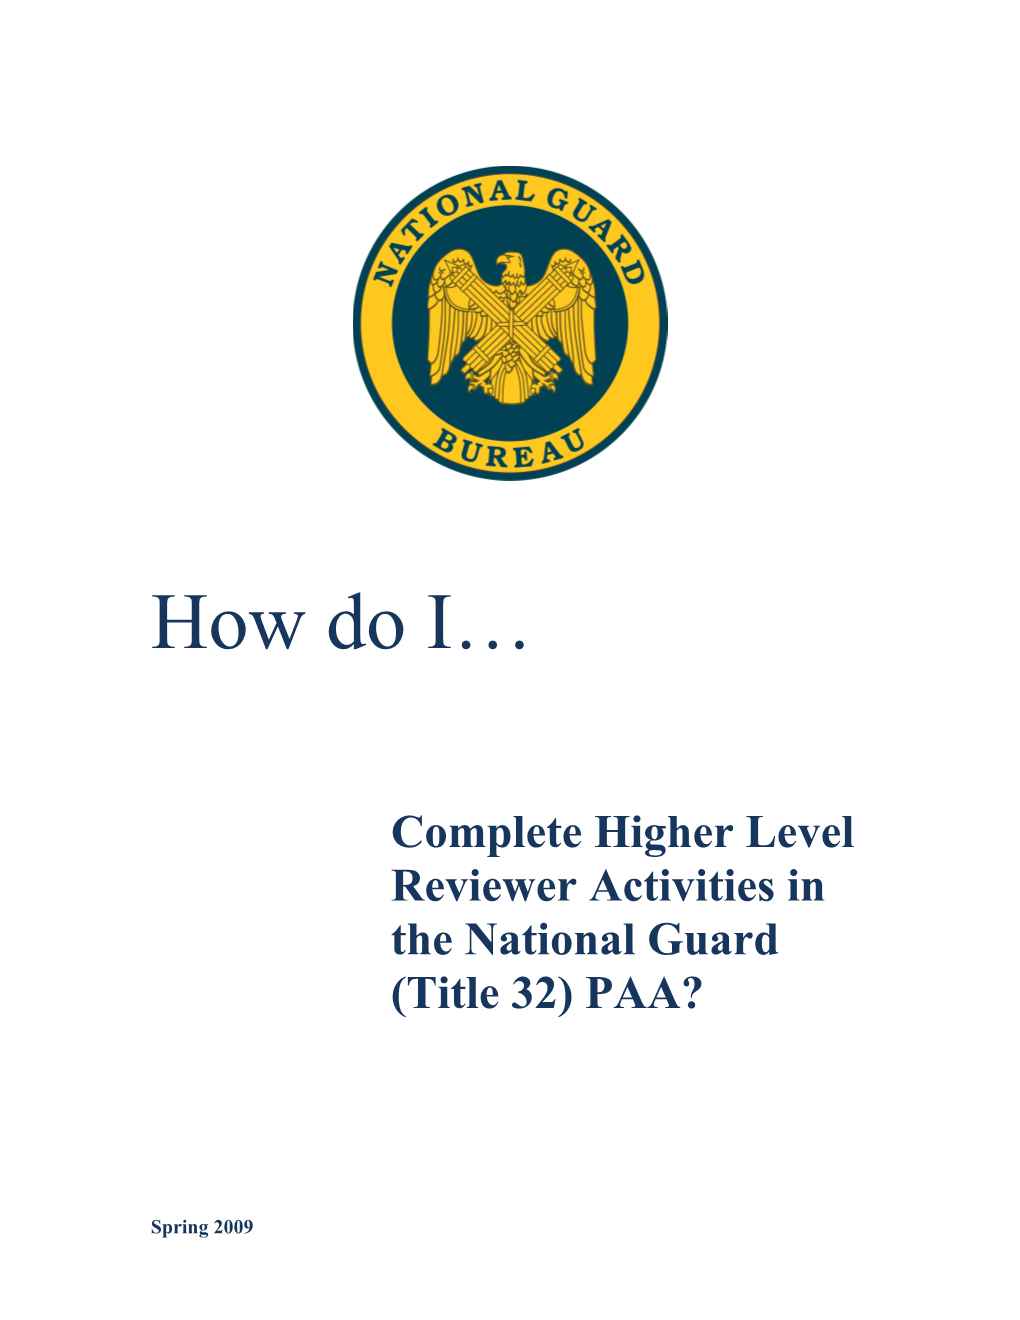 Complete Higher Level Reviewer Activities in the National Guard (Title 32) PAA?